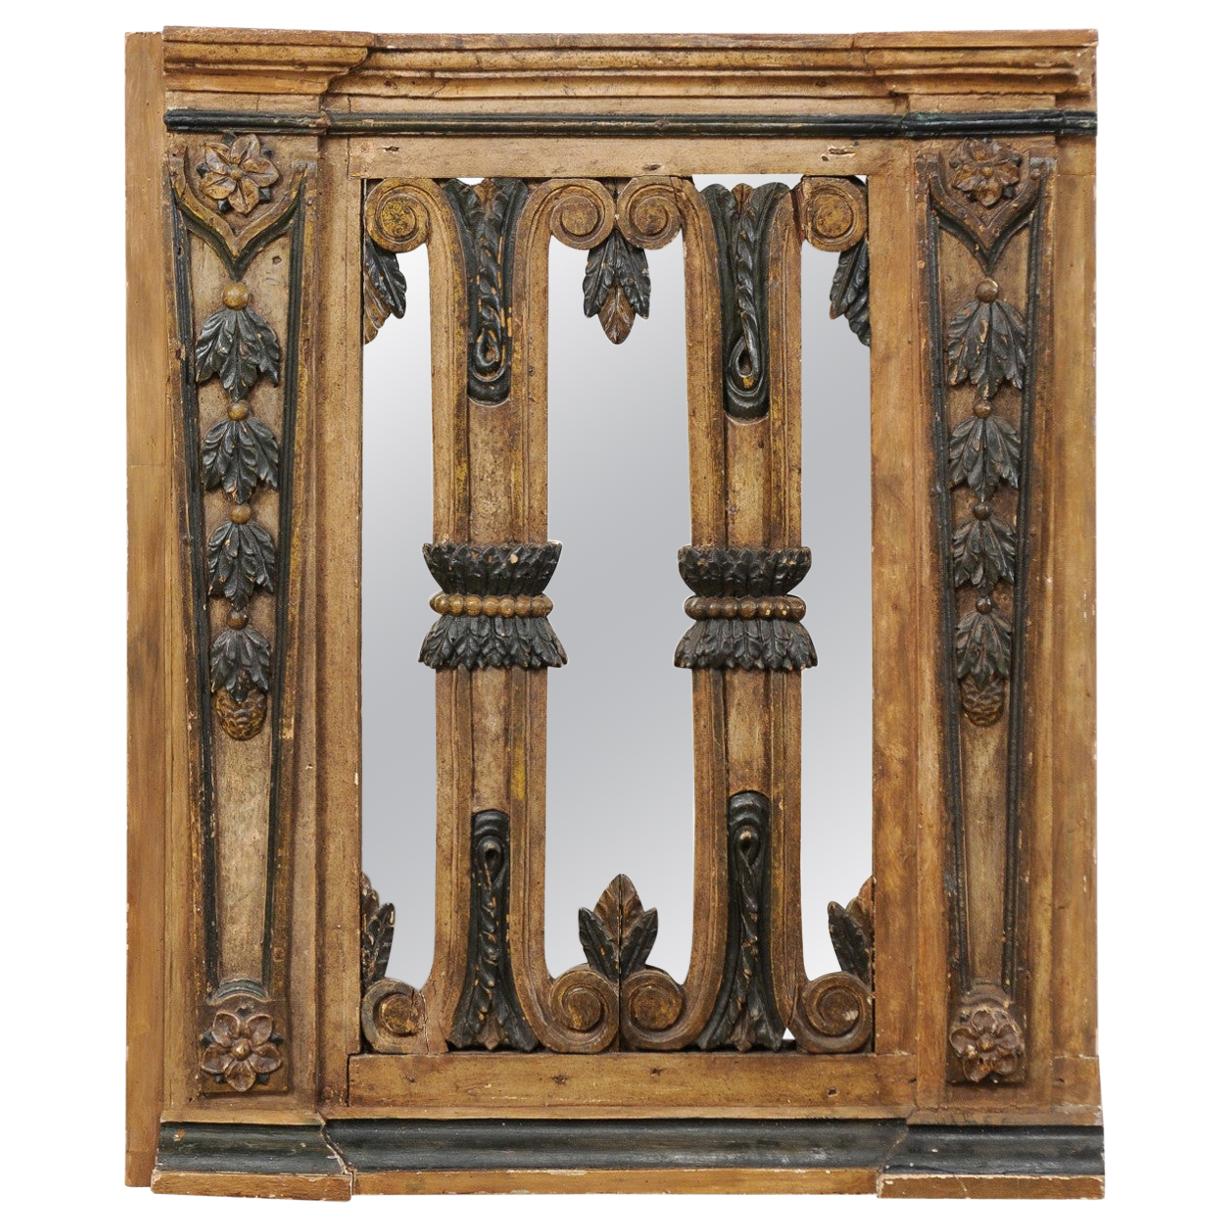 Early 19th Century Portuguese Carved Wood Gate with Mirror at Backside For Sale